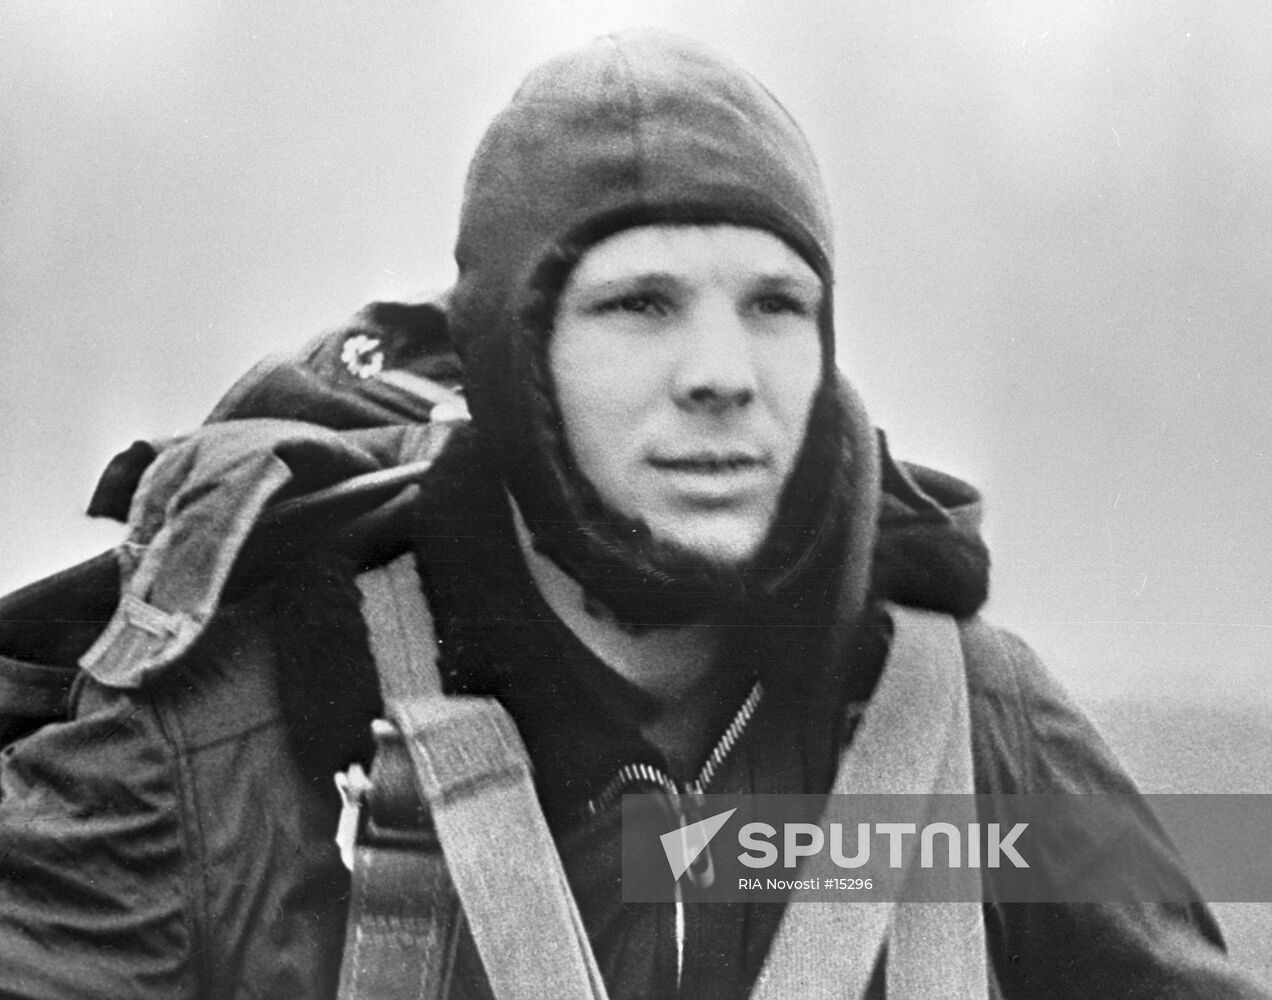 GAGARIN TRAINING FILM THE FIRST FLIGHT TO THE STARS